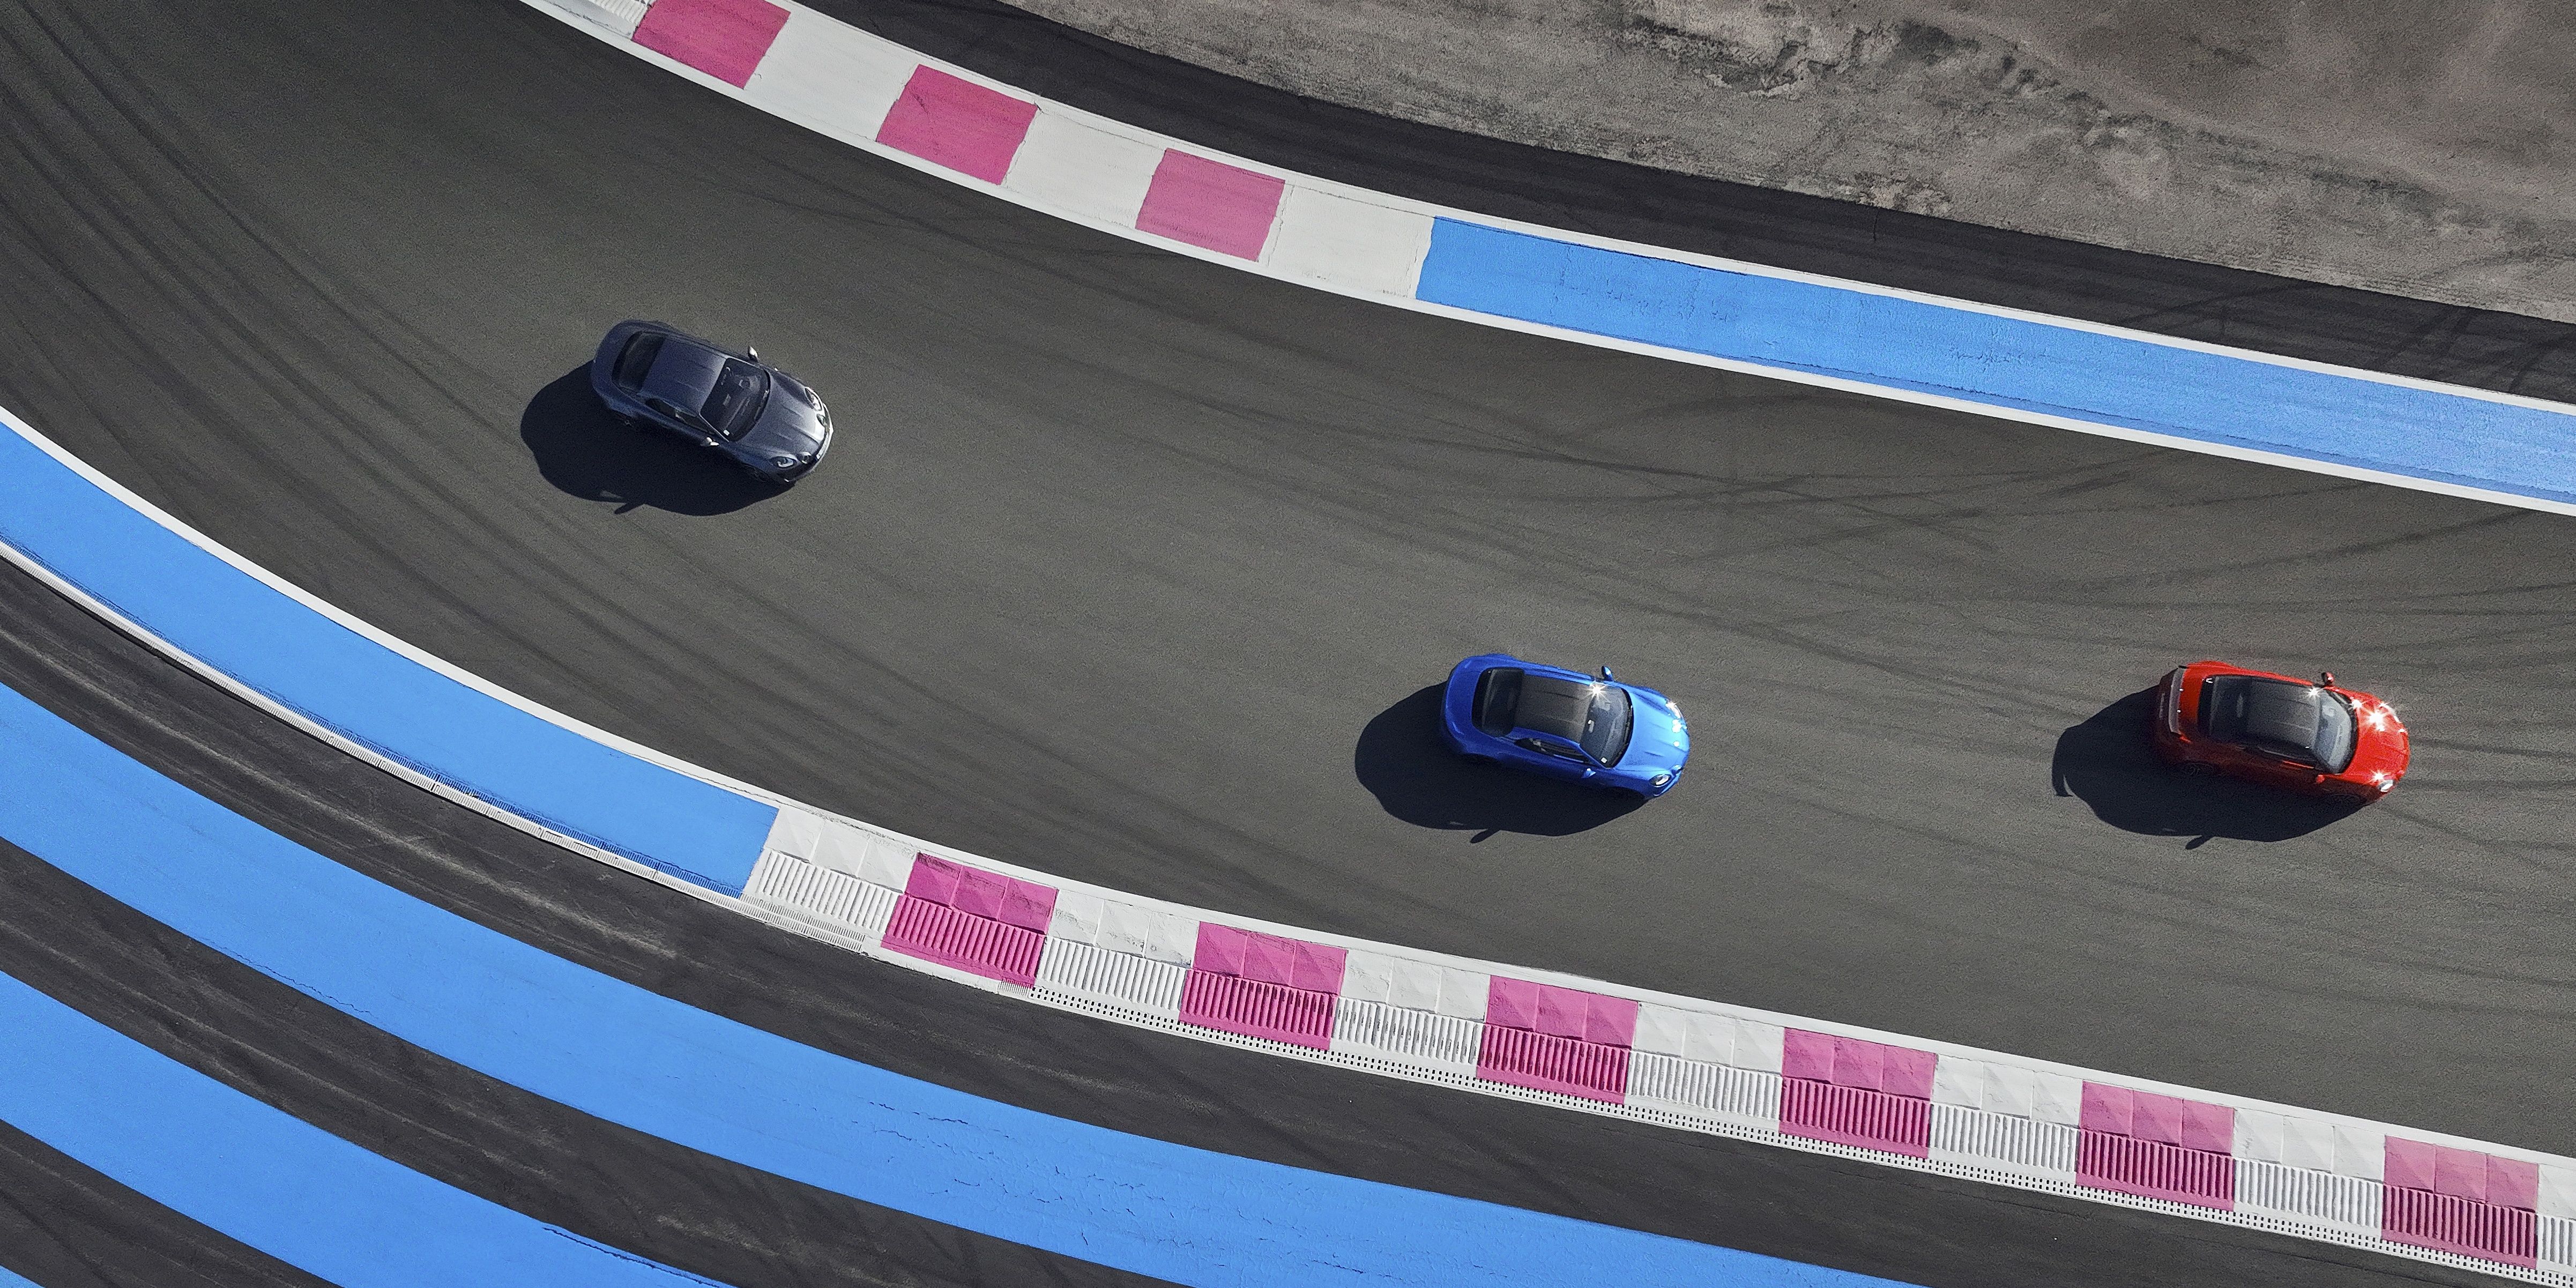 Alpine A110 on the track